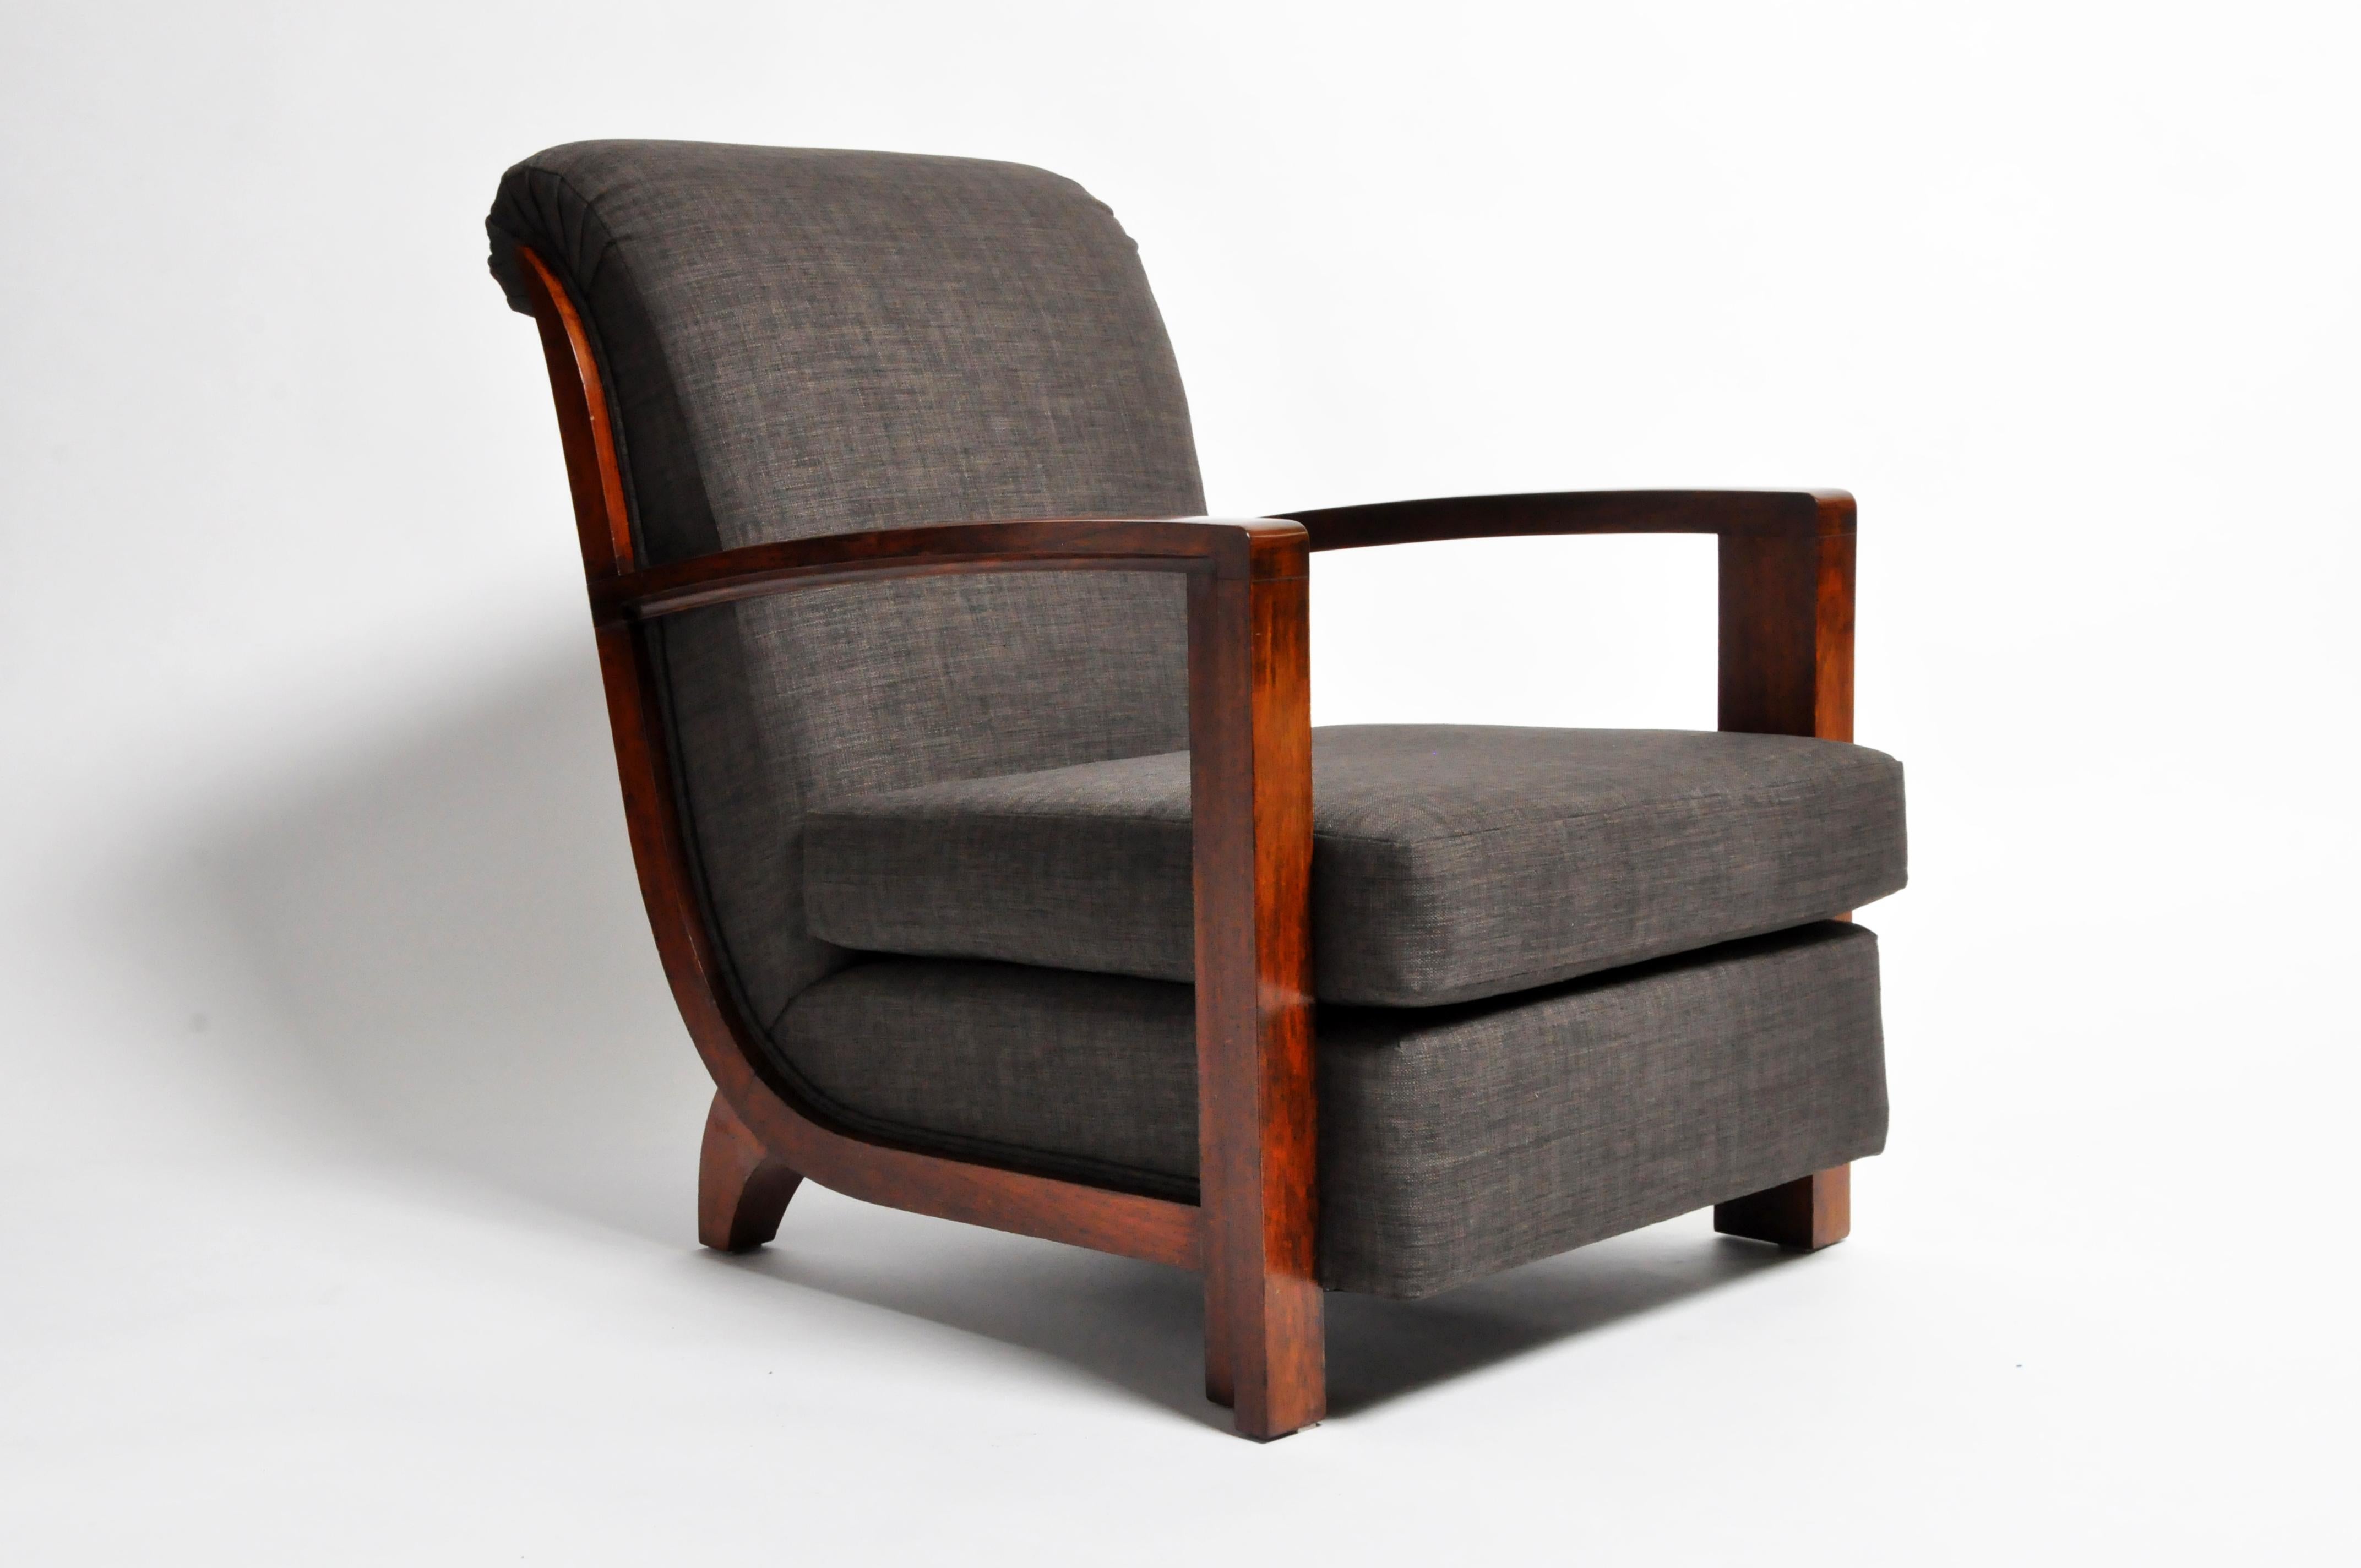 During the 1930s, Budapest, Hungary supported a thriving furniture manufacturing industry. Many makers were modernist and they enthusiastically created their own interpretations of the world's first truly global furniture style - Art Deco. The